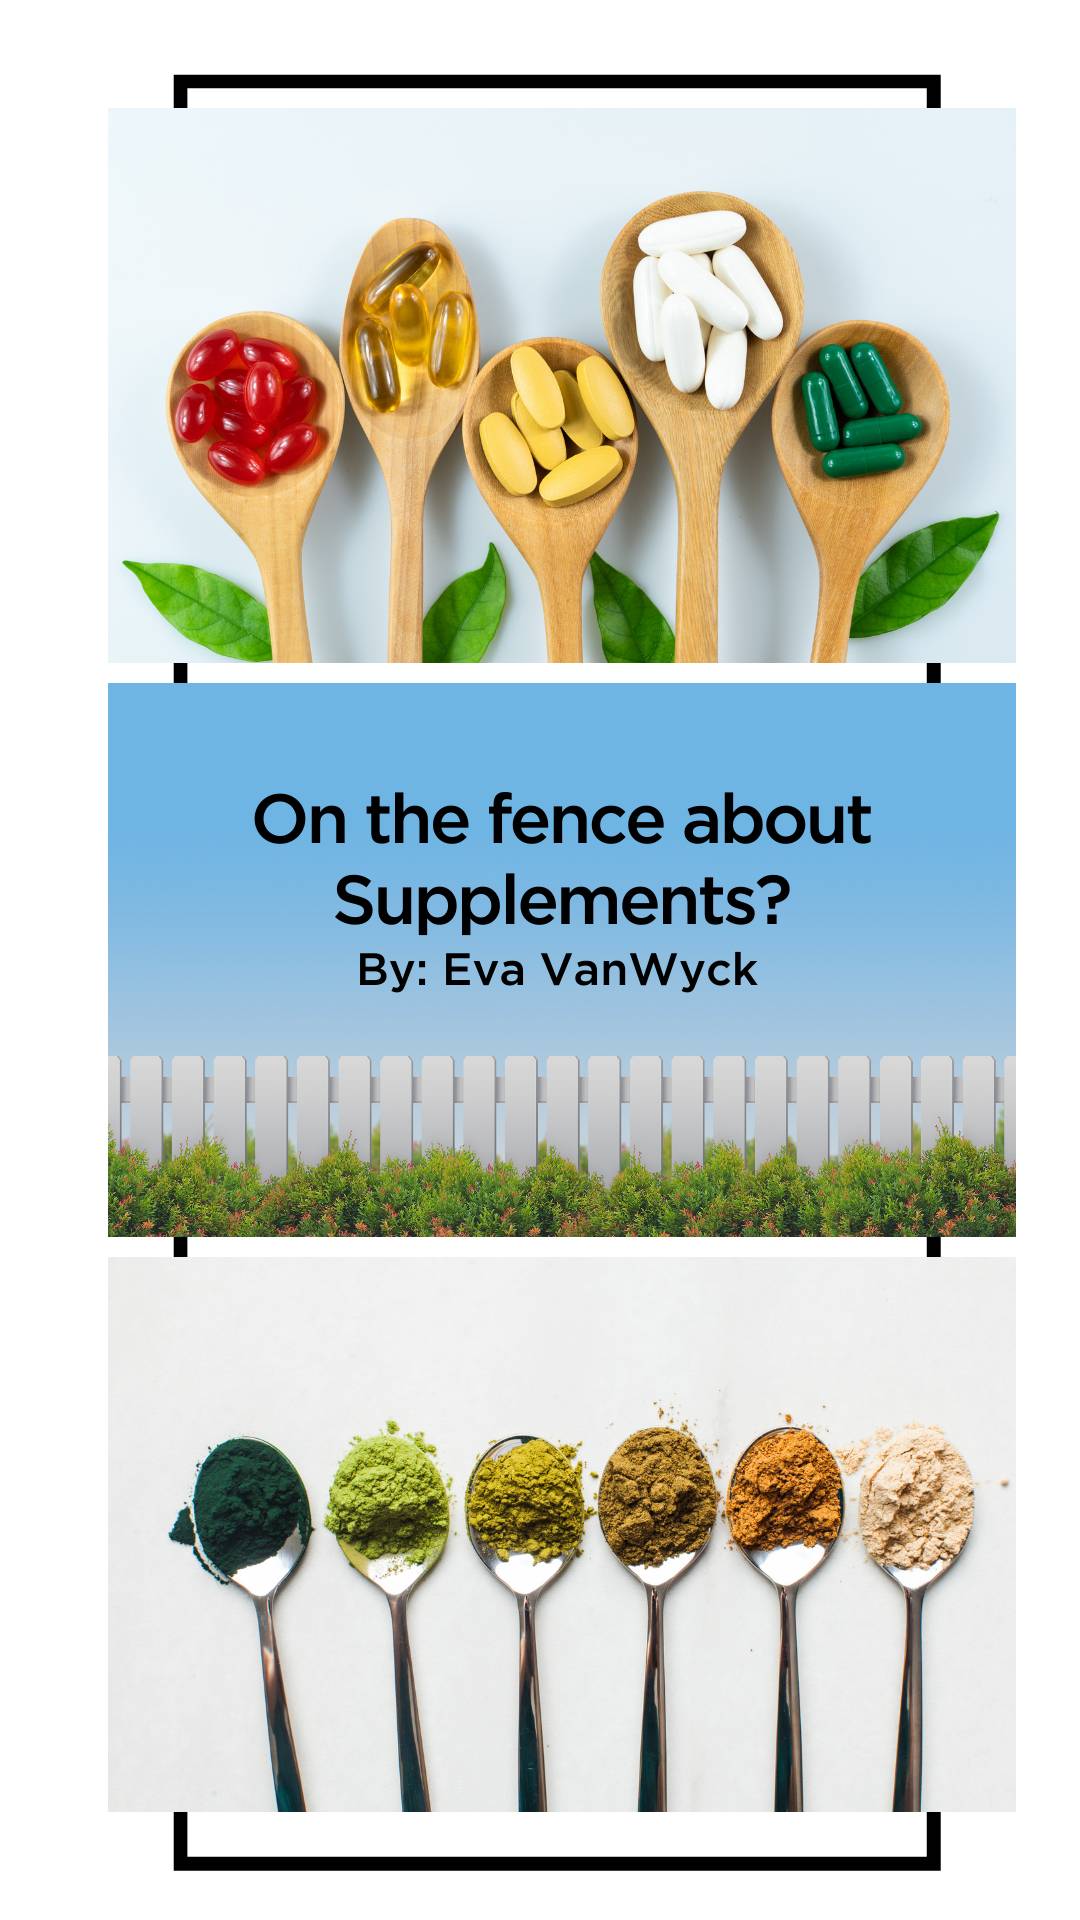 On the Fence About Supplements? By Eva VanWyck, image of a white fence and supplements of various kinds.